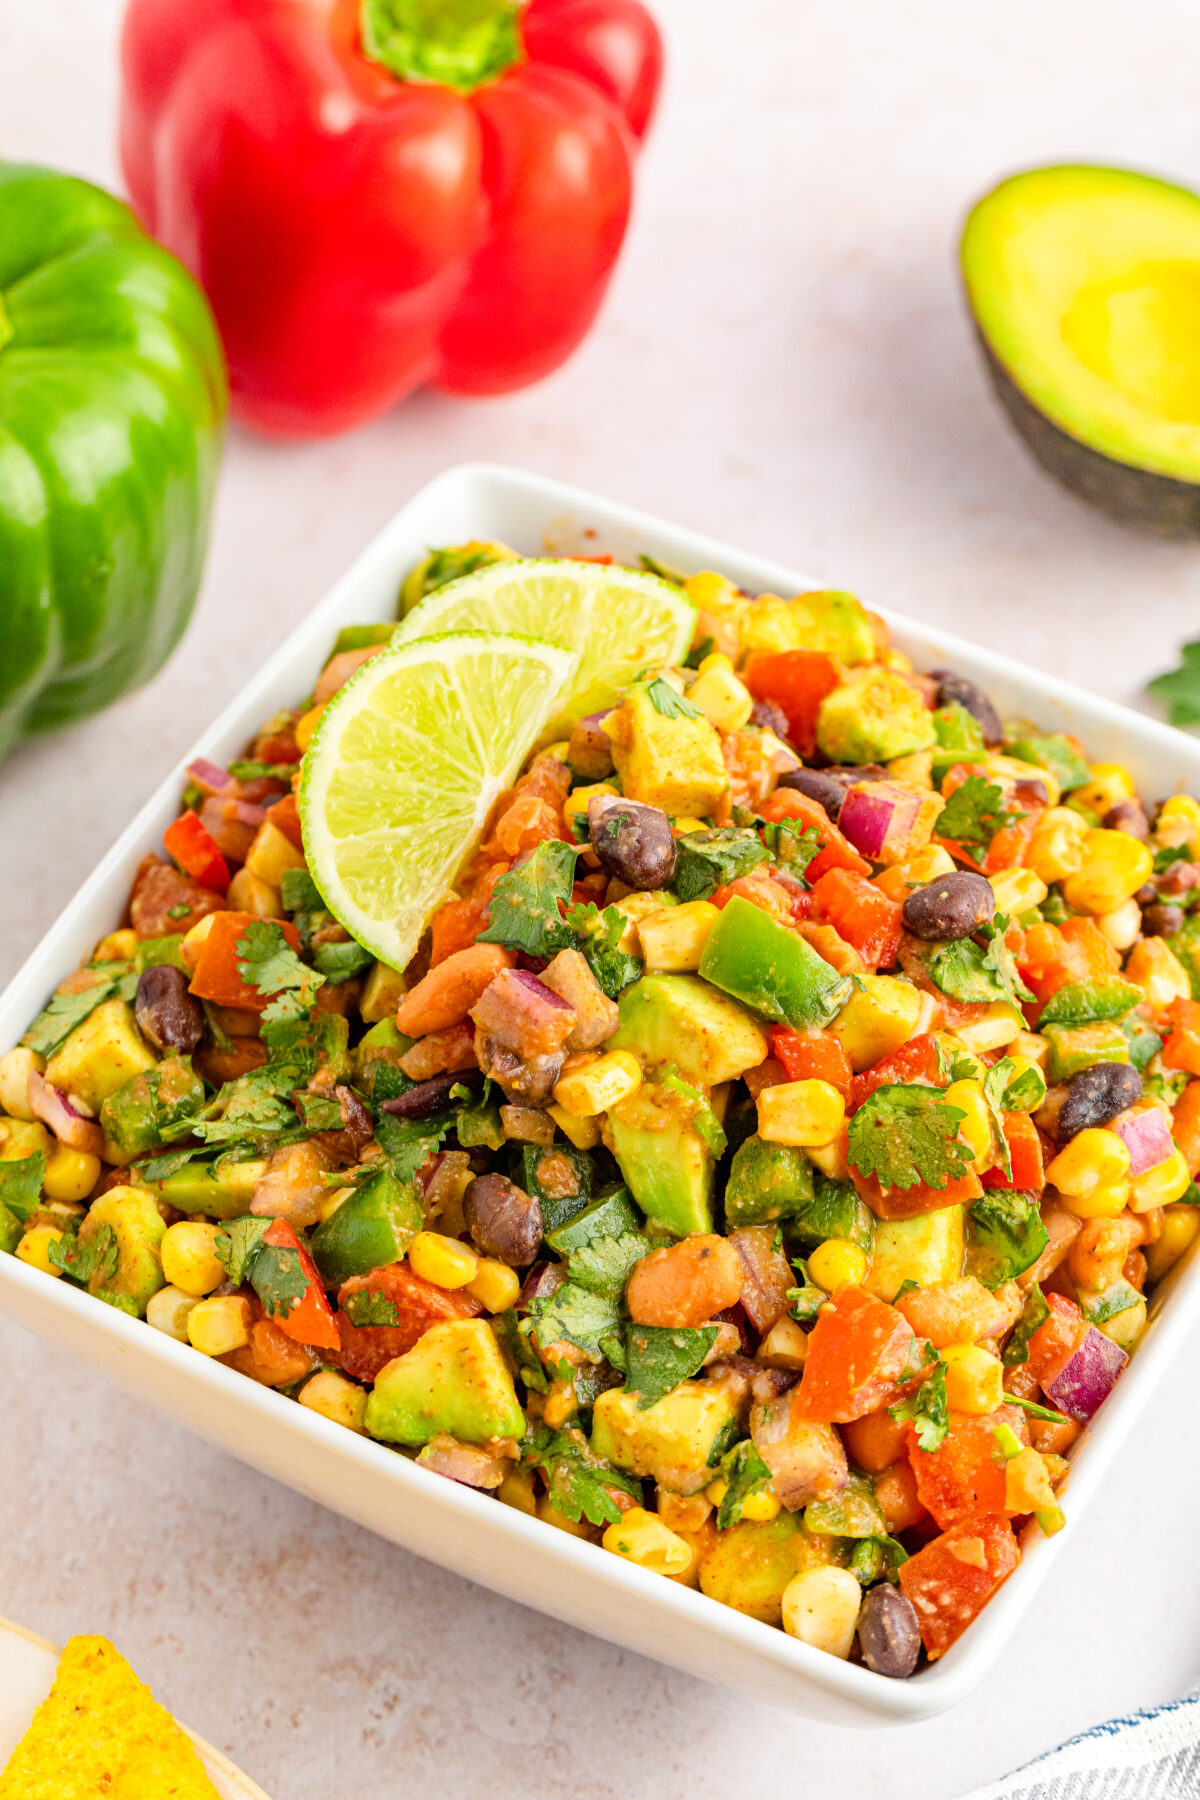 Discover our flavour-packed Cowboy Caviar recipe, a perfect blend of fresh ingredients that's easy to make for picnics, barbecues or potlucks.